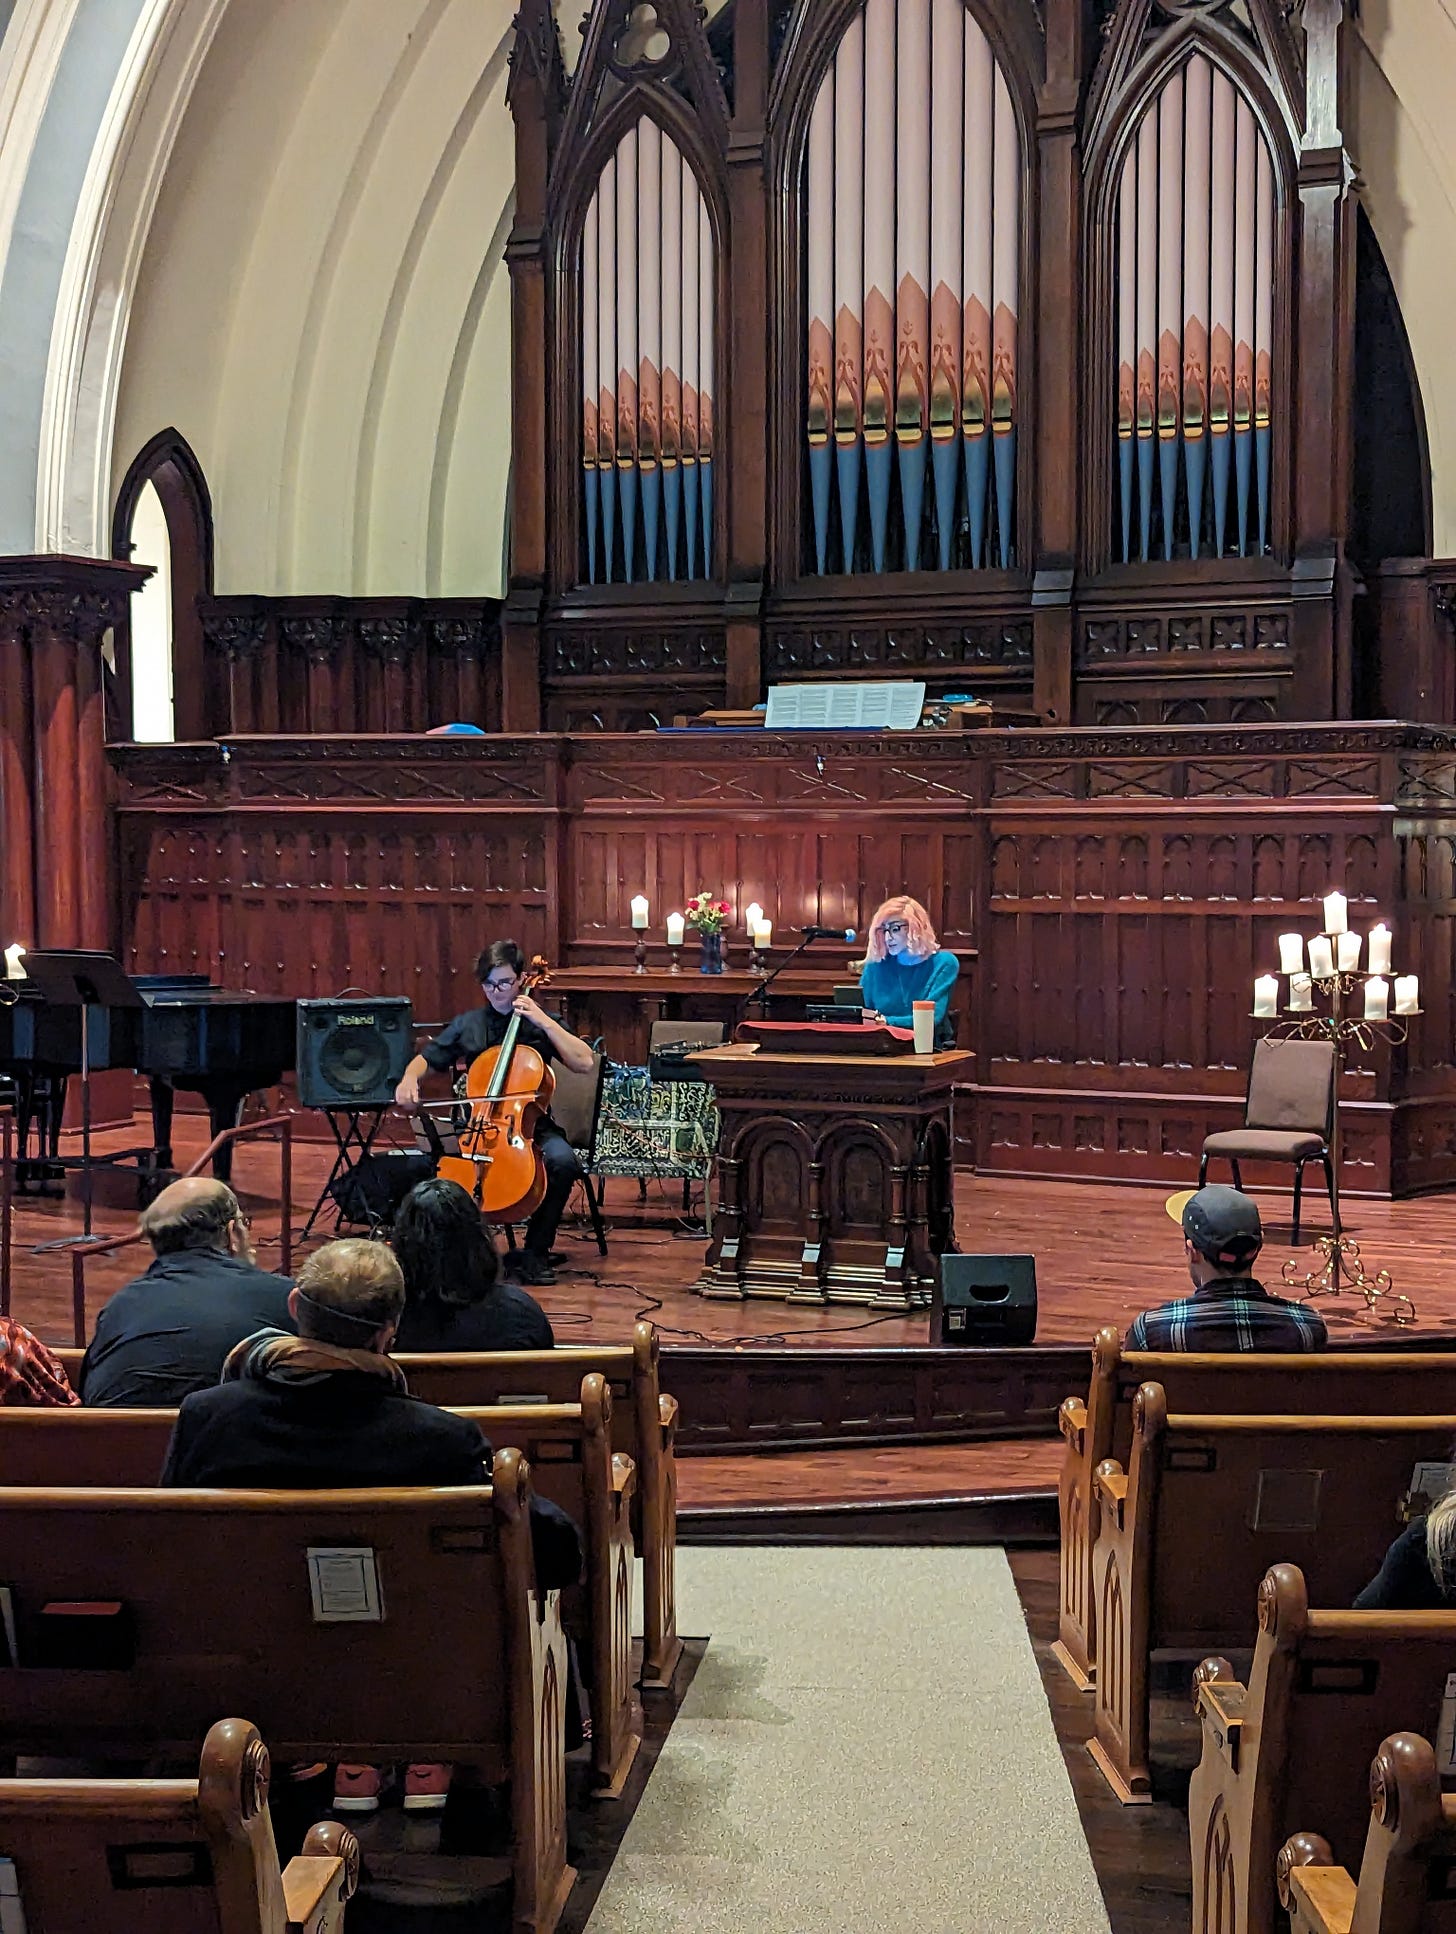 Elle sitting behind pulpit and Julian holding their cello on the "stage" in Sanctuary Hall with the gran organ behind them and candelabras flanking them with audience members in view